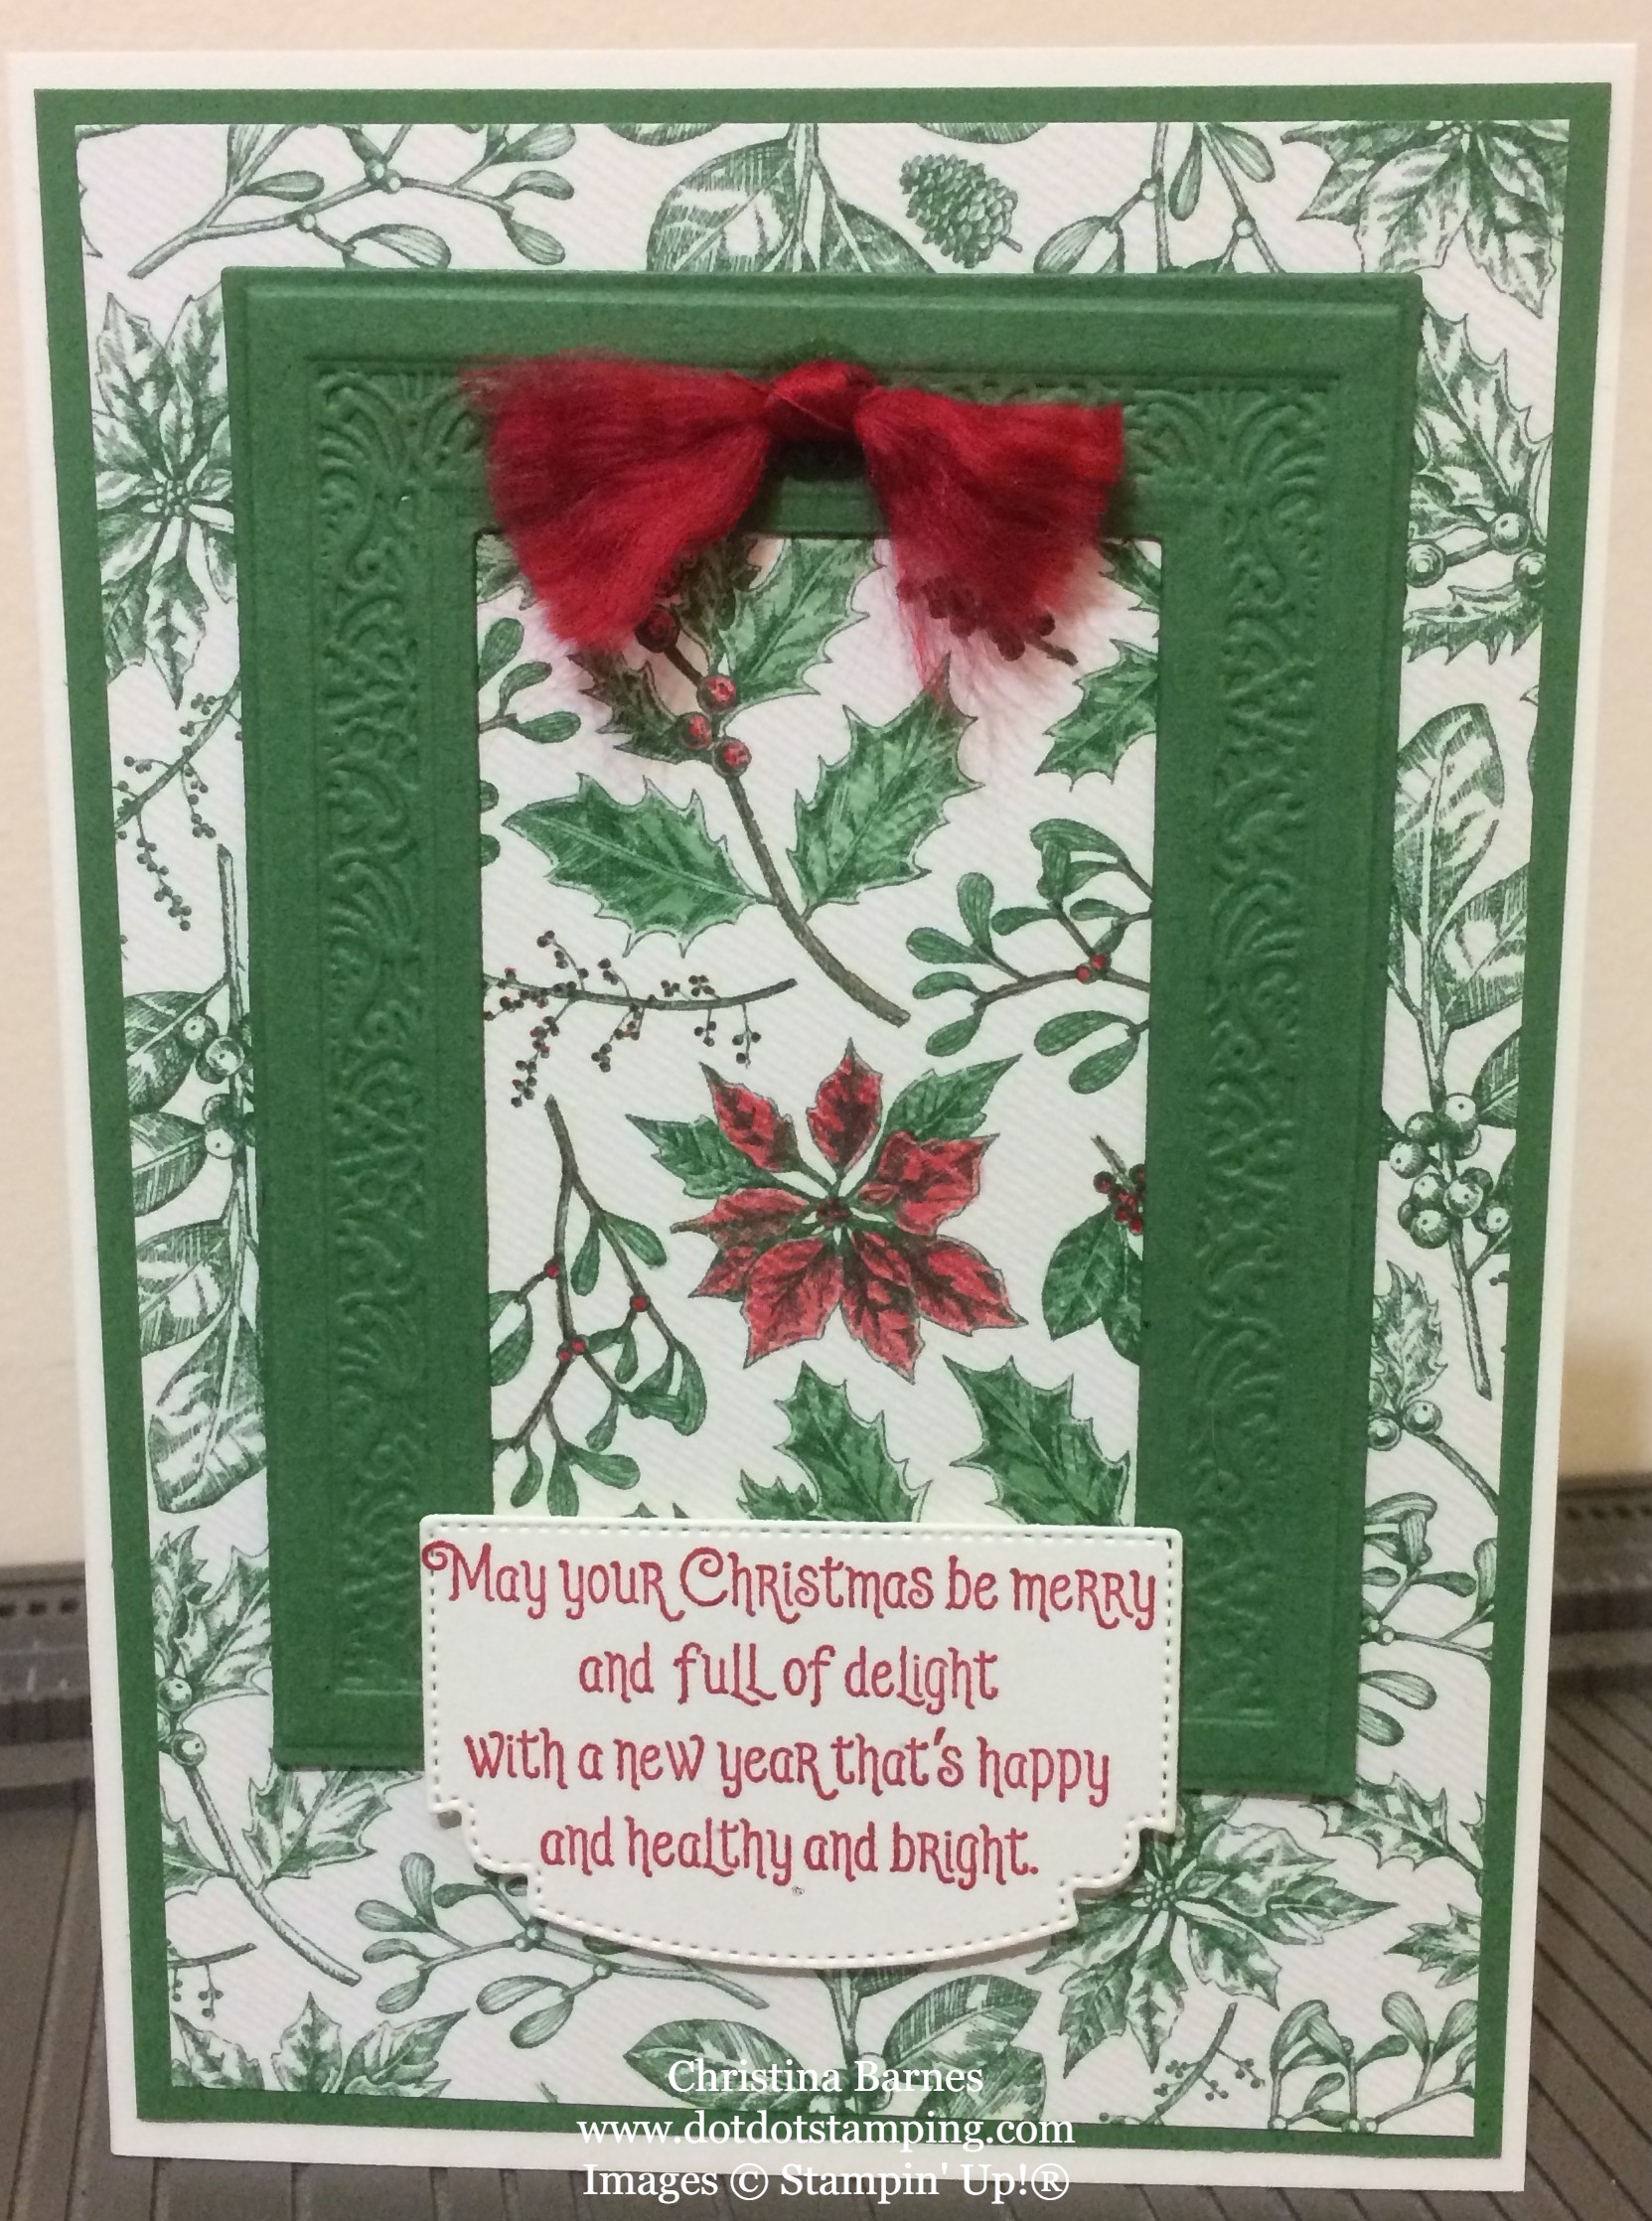 Toile Tidings Designer Series Paper with Heirloom Frames Christmas Card 2019 Stampin' Up! Holiday Catalogue Christina Barnes Dot Dot Stamping